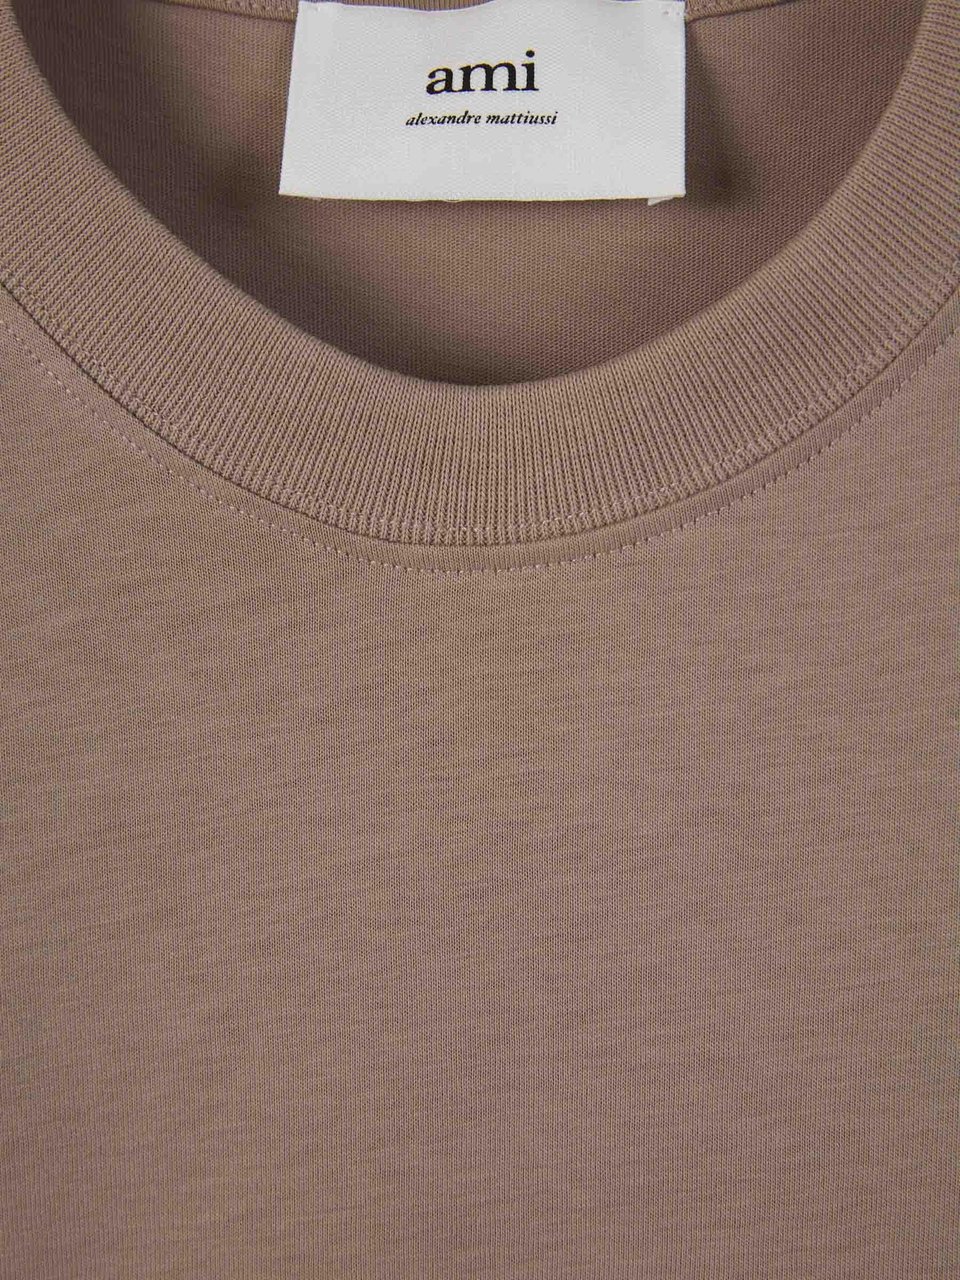 AMI Paris Embroidered Cotton T-Shirt Taupe